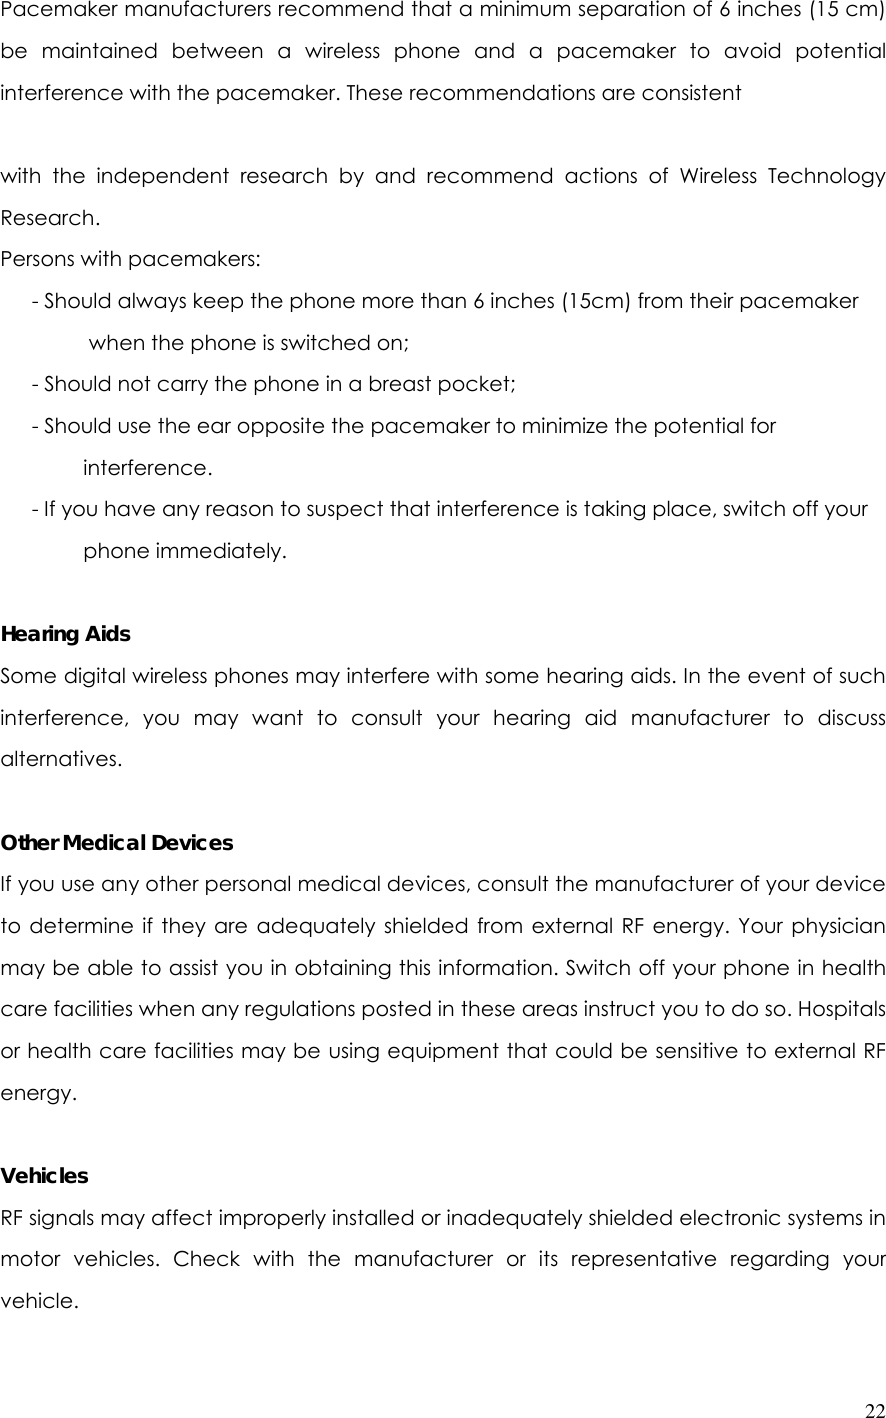  22Pacemaker manufacturers recommend that a minimum separation of 6 inches (15 cm) be maintained between a wireless phone and a pacemaker to avoid potential interference with the pacemaker. These recommendations are consistent    with the independent research by and recommend actions of Wireless Technology Research. Persons with pacemakers:       - Should always keep the phone more than 6 inches (15cm) from their pacemaker             when the phone is switched on;       - Should not carry the phone in a breast pocket;       - Should use the ear opposite the pacemaker to minimize the potential for   interference.       - If you have any reason to suspect that interference is taking place, switch off your   phone immediately.  Hearing Aids Some digital wireless phones may interfere with some hearing aids. In the event of such interference, you may want to consult your hearing aid manufacturer to discuss alternatives.  Other Medical Devices If you use any other personal medical devices, consult the manufacturer of your device to determine if they are adequately shielded from external RF energy. Your physician may be able to assist you in obtaining this information. Switch off your phone in health care facilities when any regulations posted in these areas instruct you to do so. Hospitals or health care facilities may be using equipment that could be sensitive to external RF energy.  Vehicles RF signals may affect improperly installed or inadequately shielded electronic systems in motor vehicles. Check with the manufacturer or its representative regarding your vehicle. 